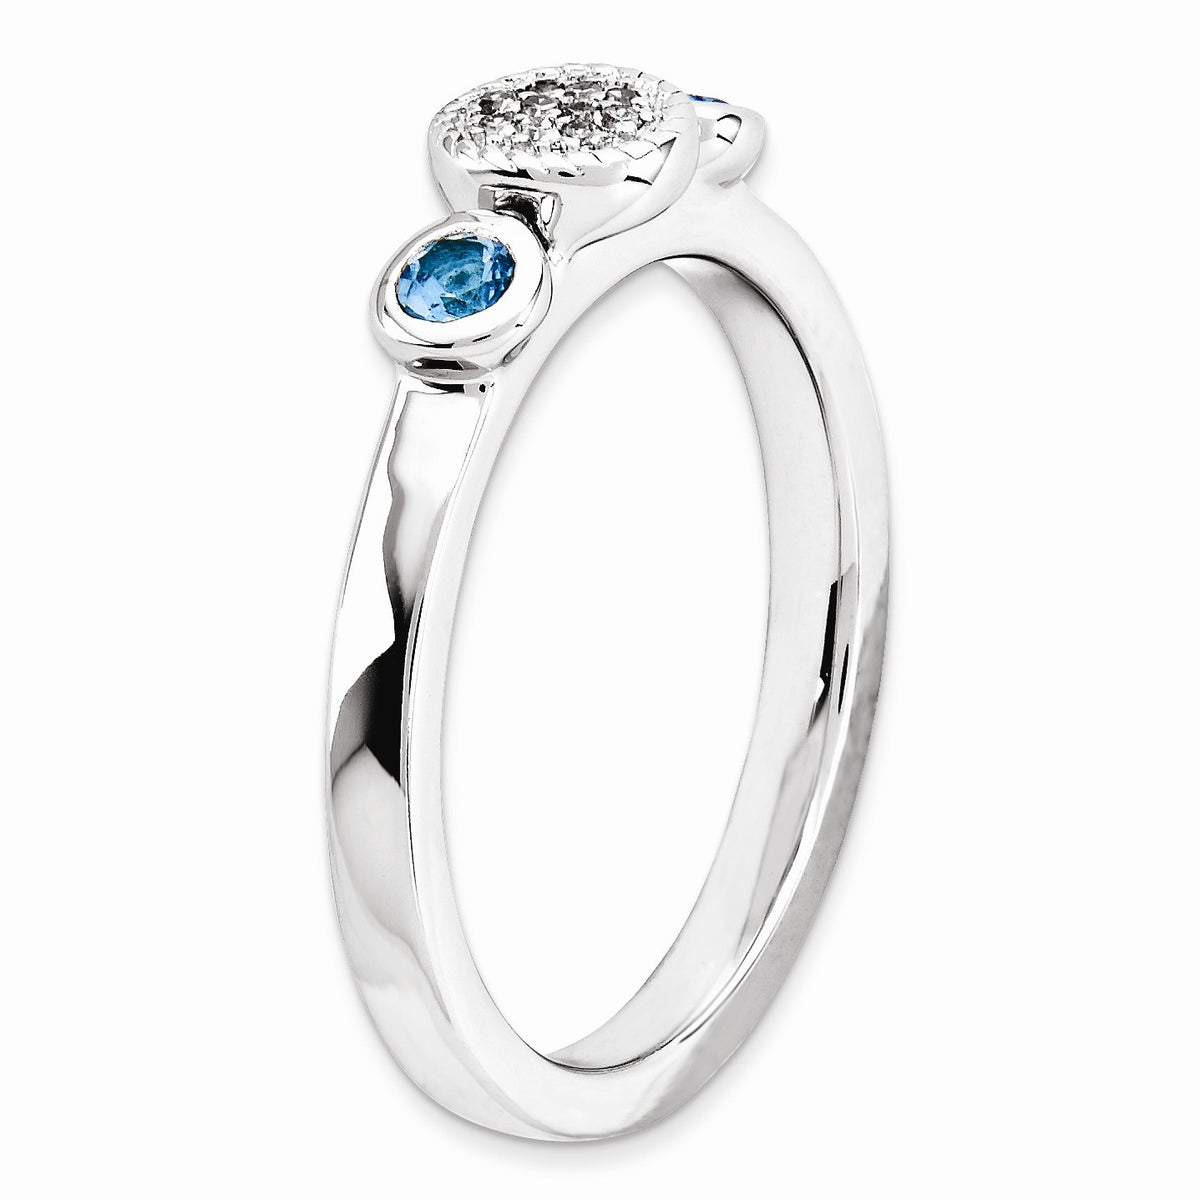 Alternate view of the Sterling Silver Stackable Blue Topaz &amp; .05 Ctw HI/I3 Diamond Ring by The Black Bow Jewelry Co.